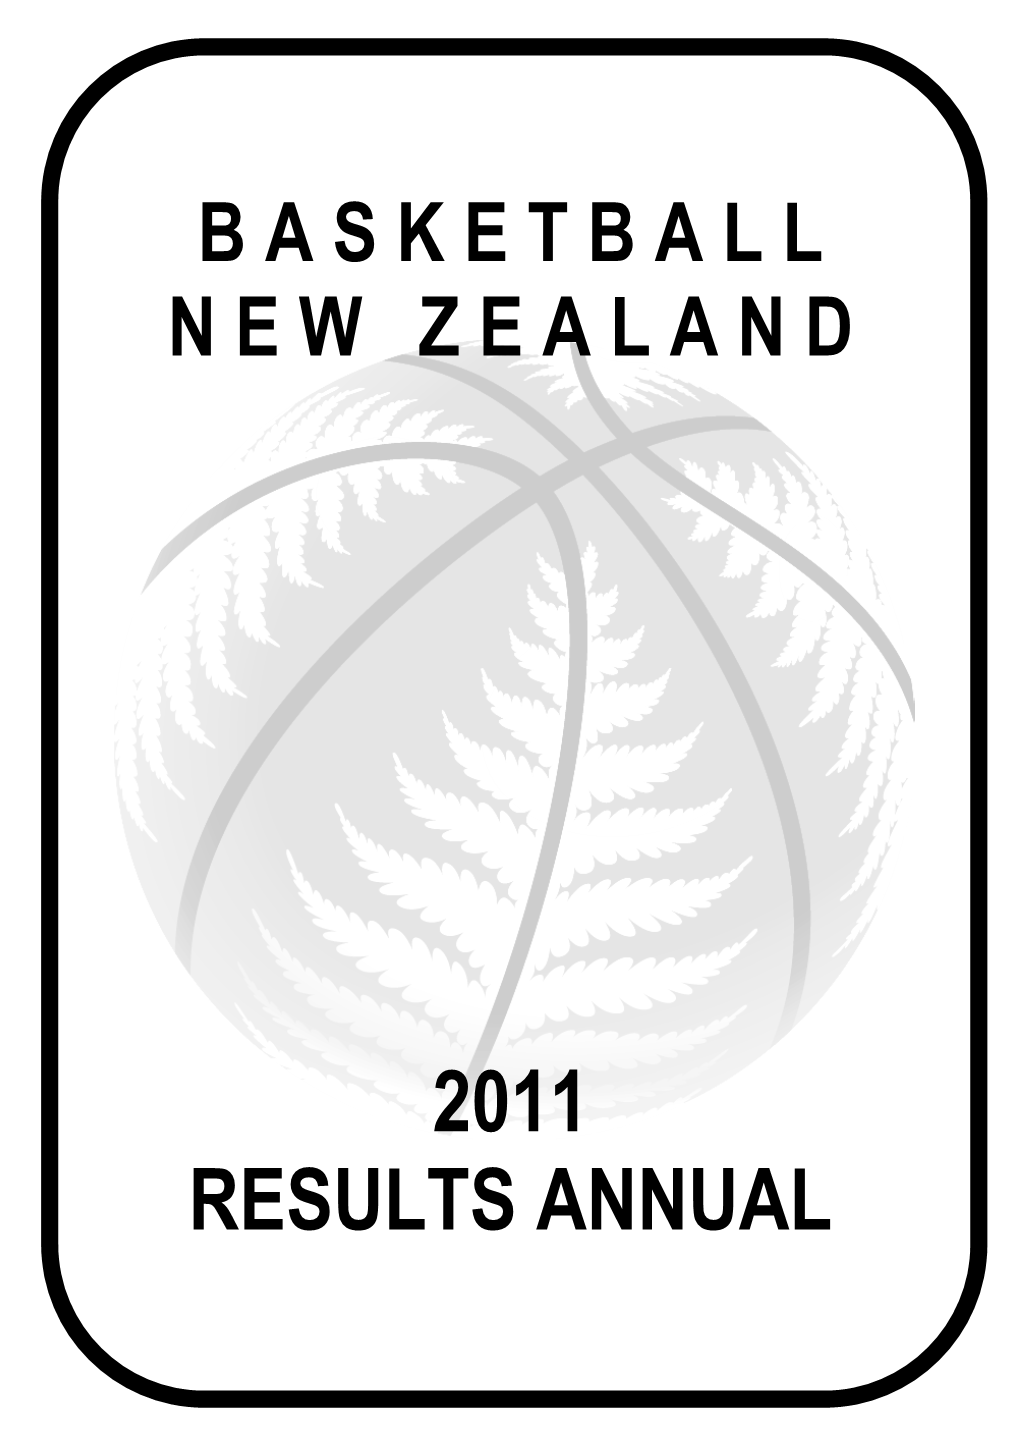 2011 Results Annual